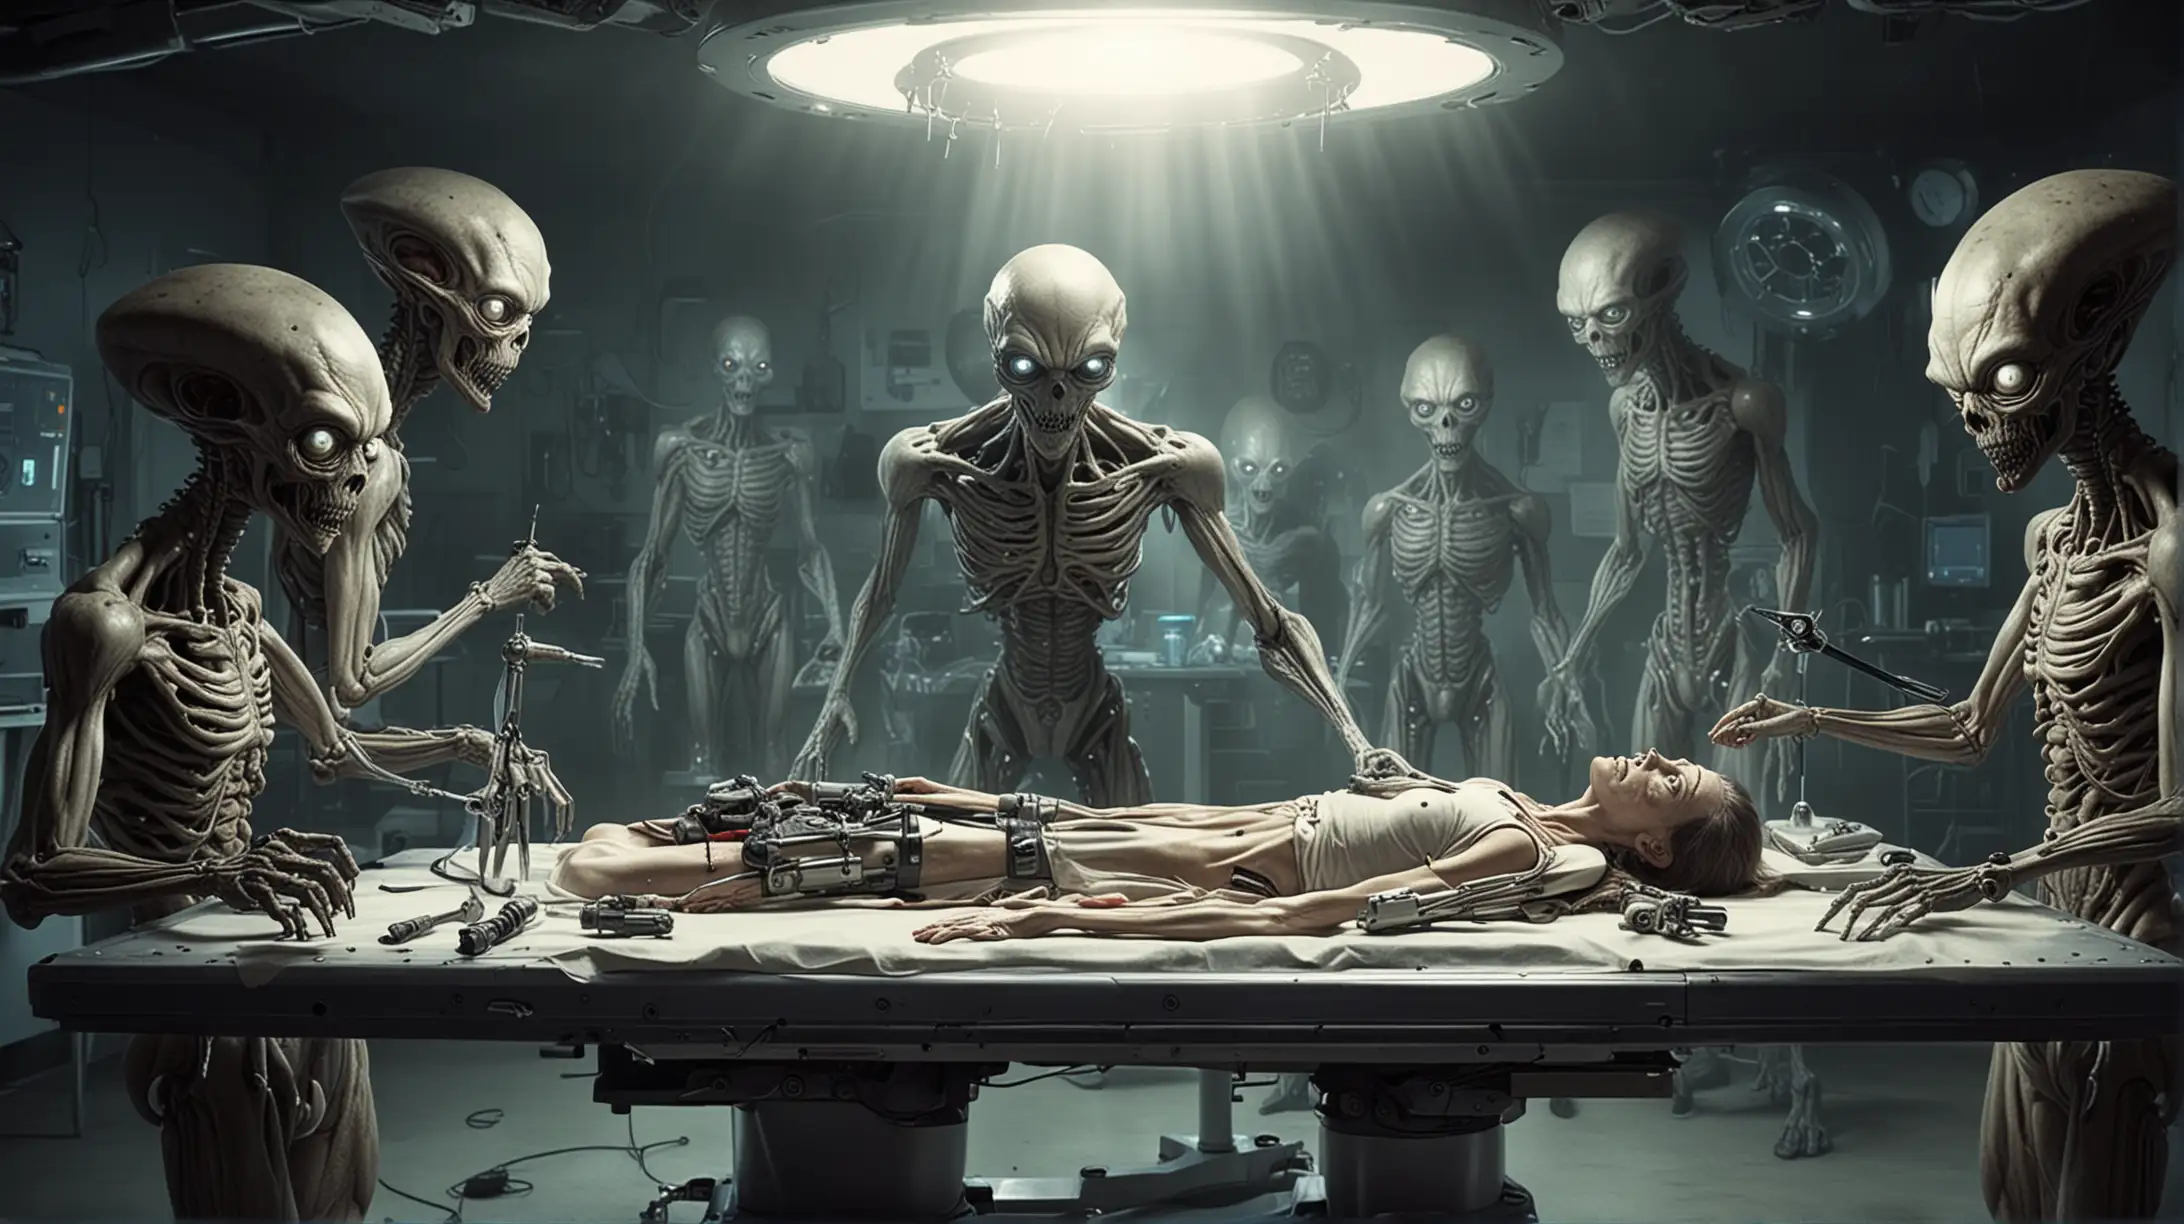 A UFO abductee on a operating table surrounded by four scary looking aliens holding weird scary tools, background is the inside of the UFO